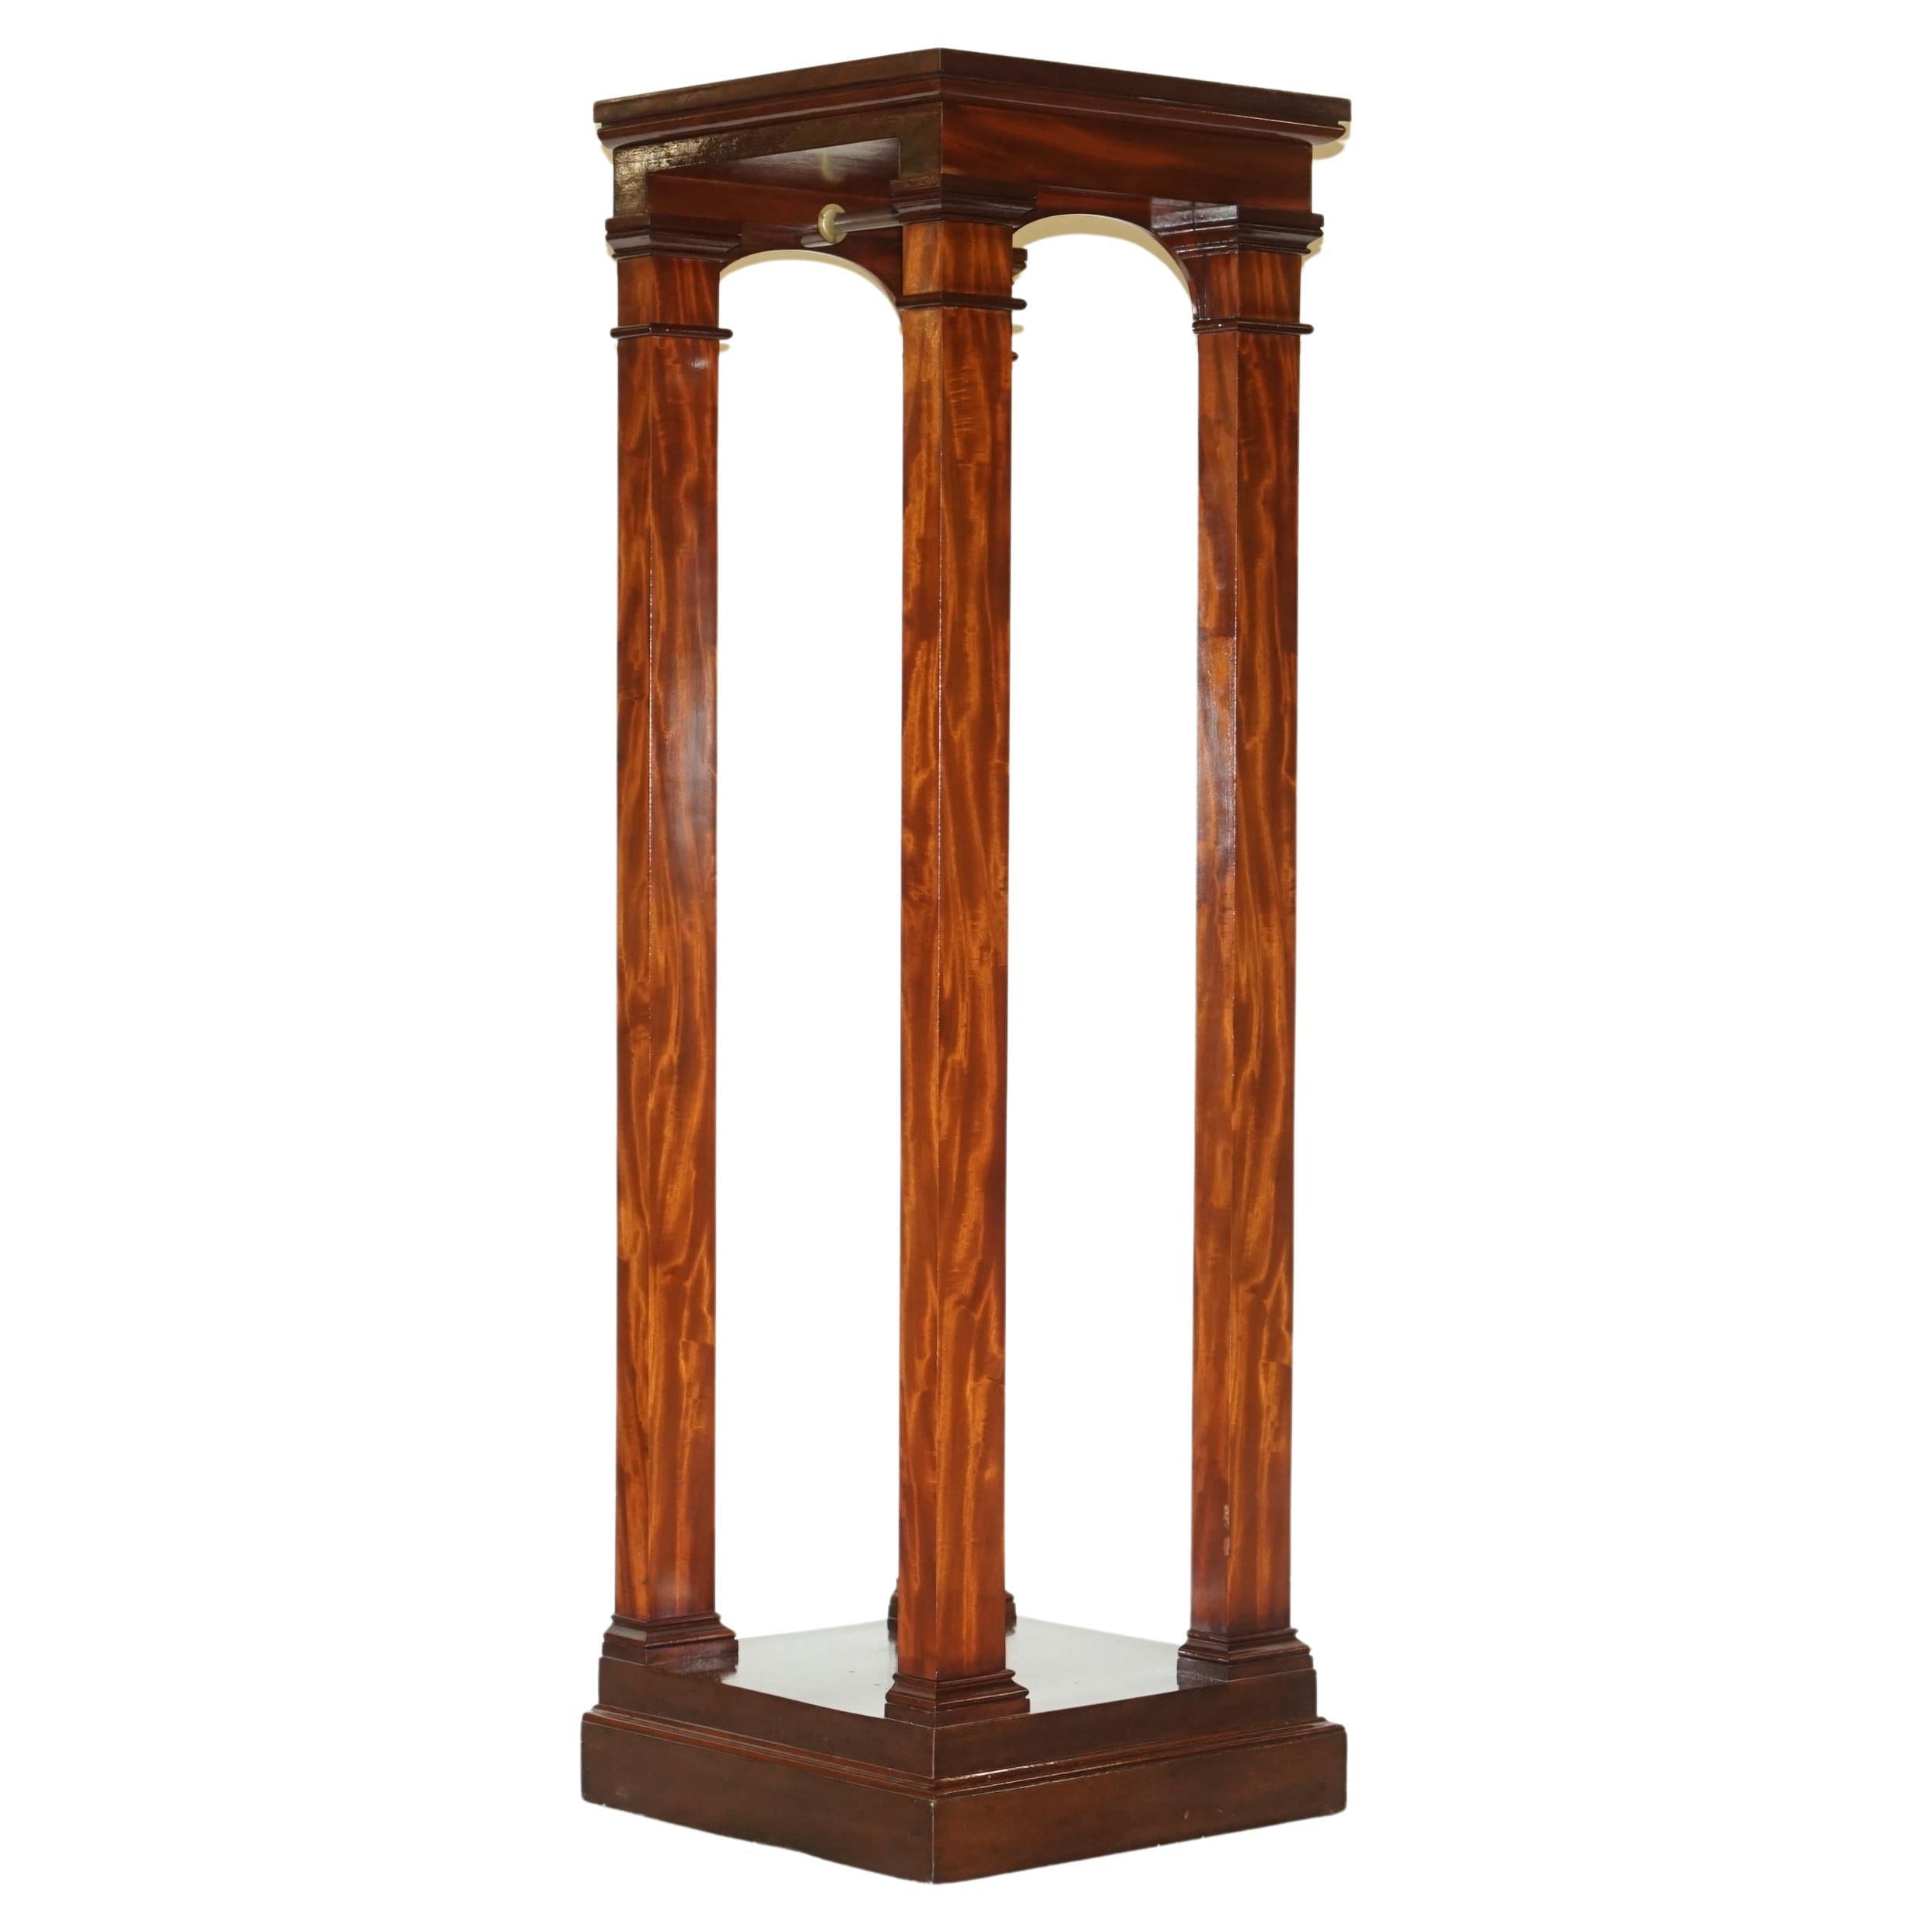 Antique Flamed Hardwood Pedestal from Princess Diana's Family Home Spencer House For Sale